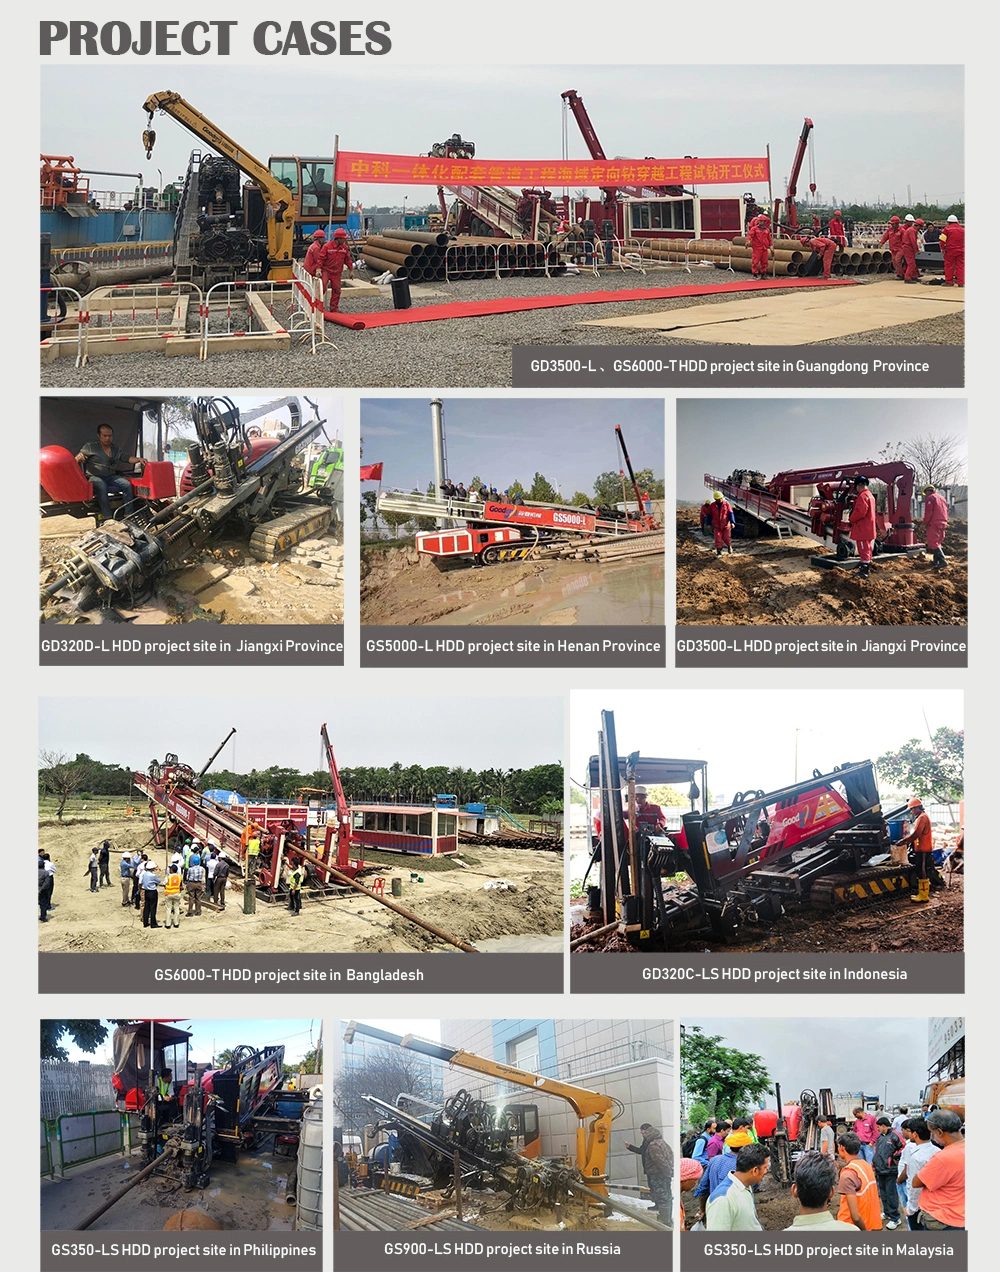 38T(A) goodeng trenchless pipe construction HDD rig drill rig